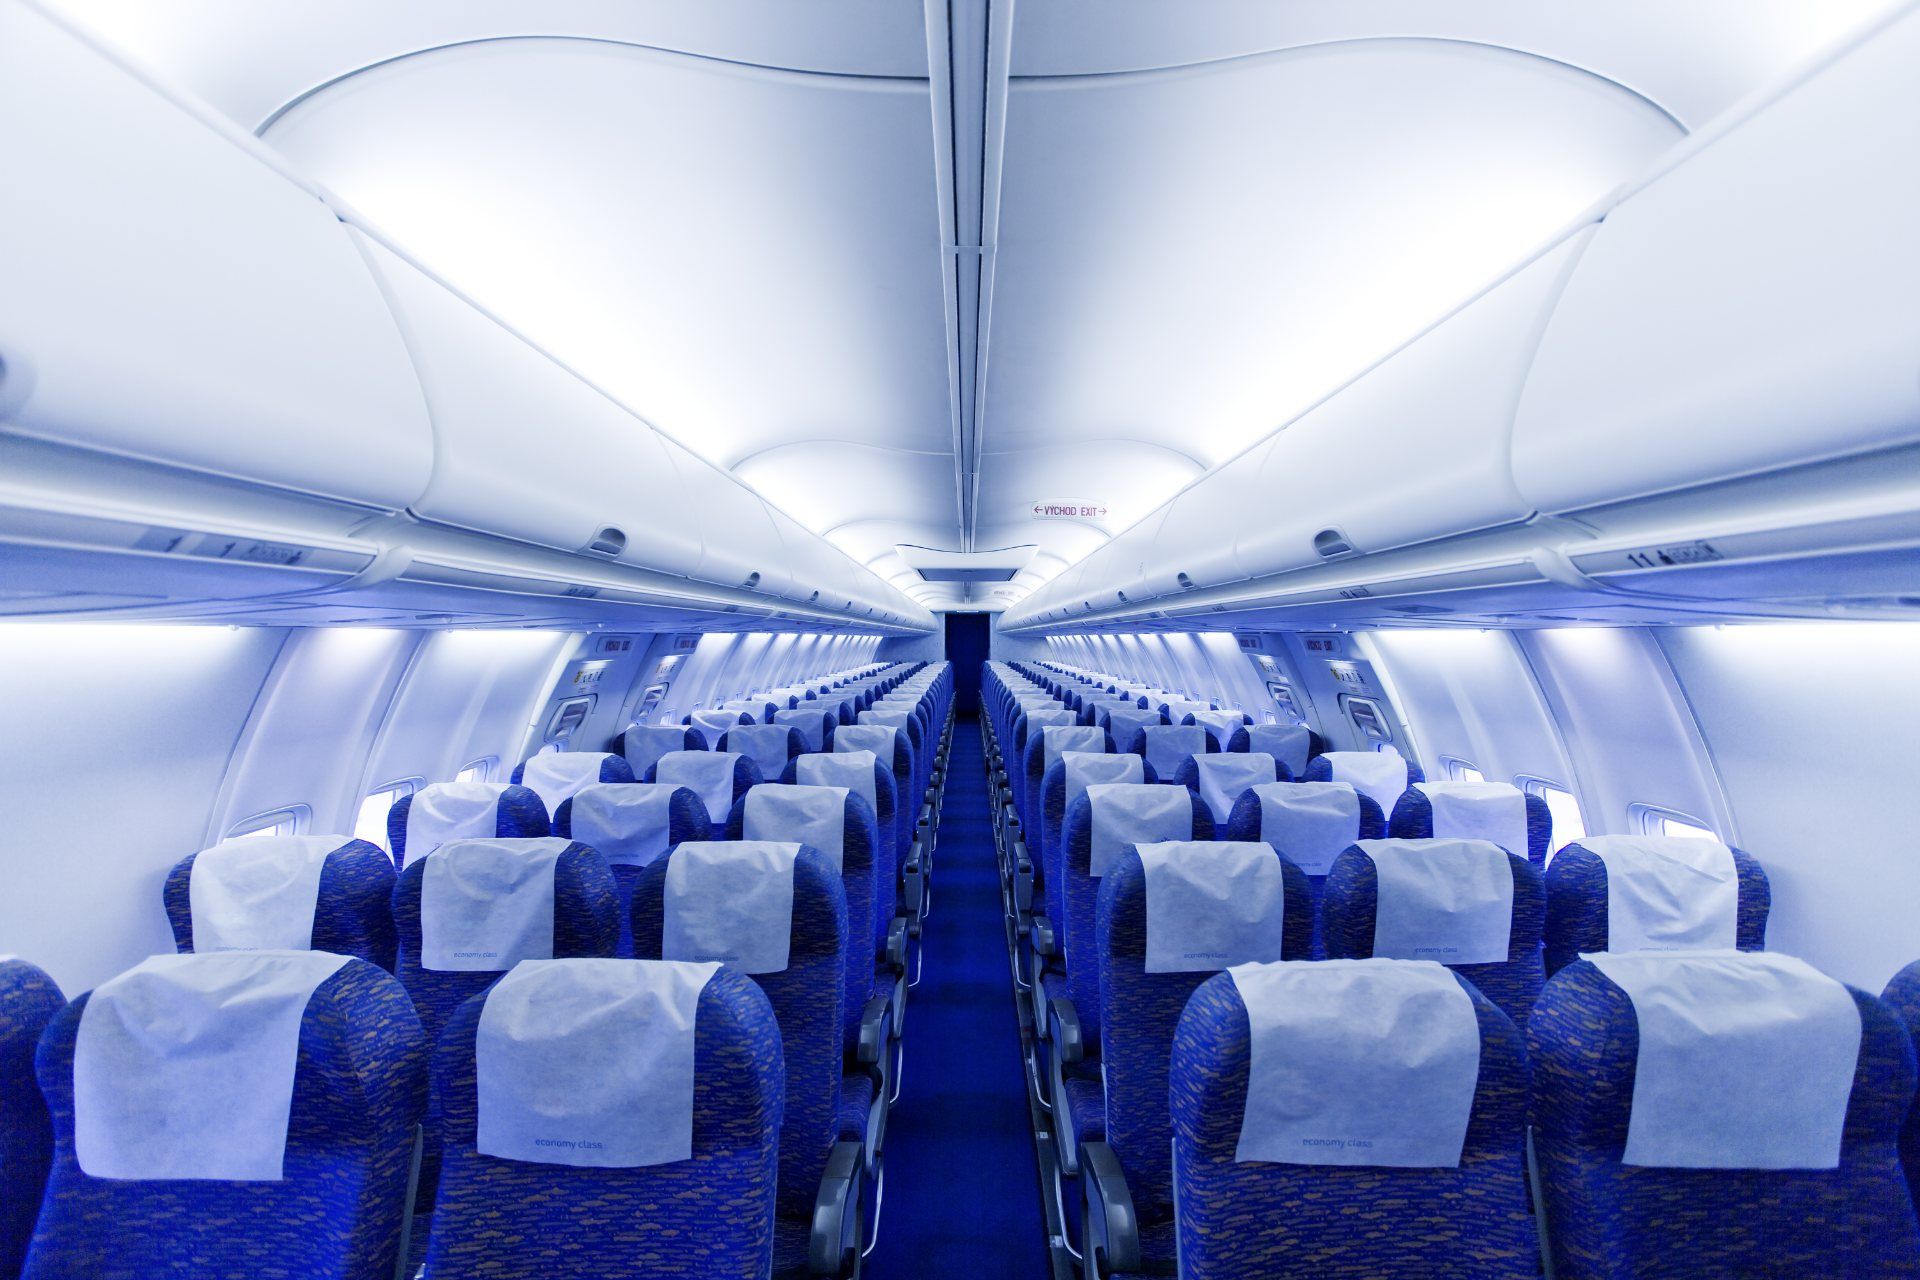 Empty airplane cabin with blue seats and carpet